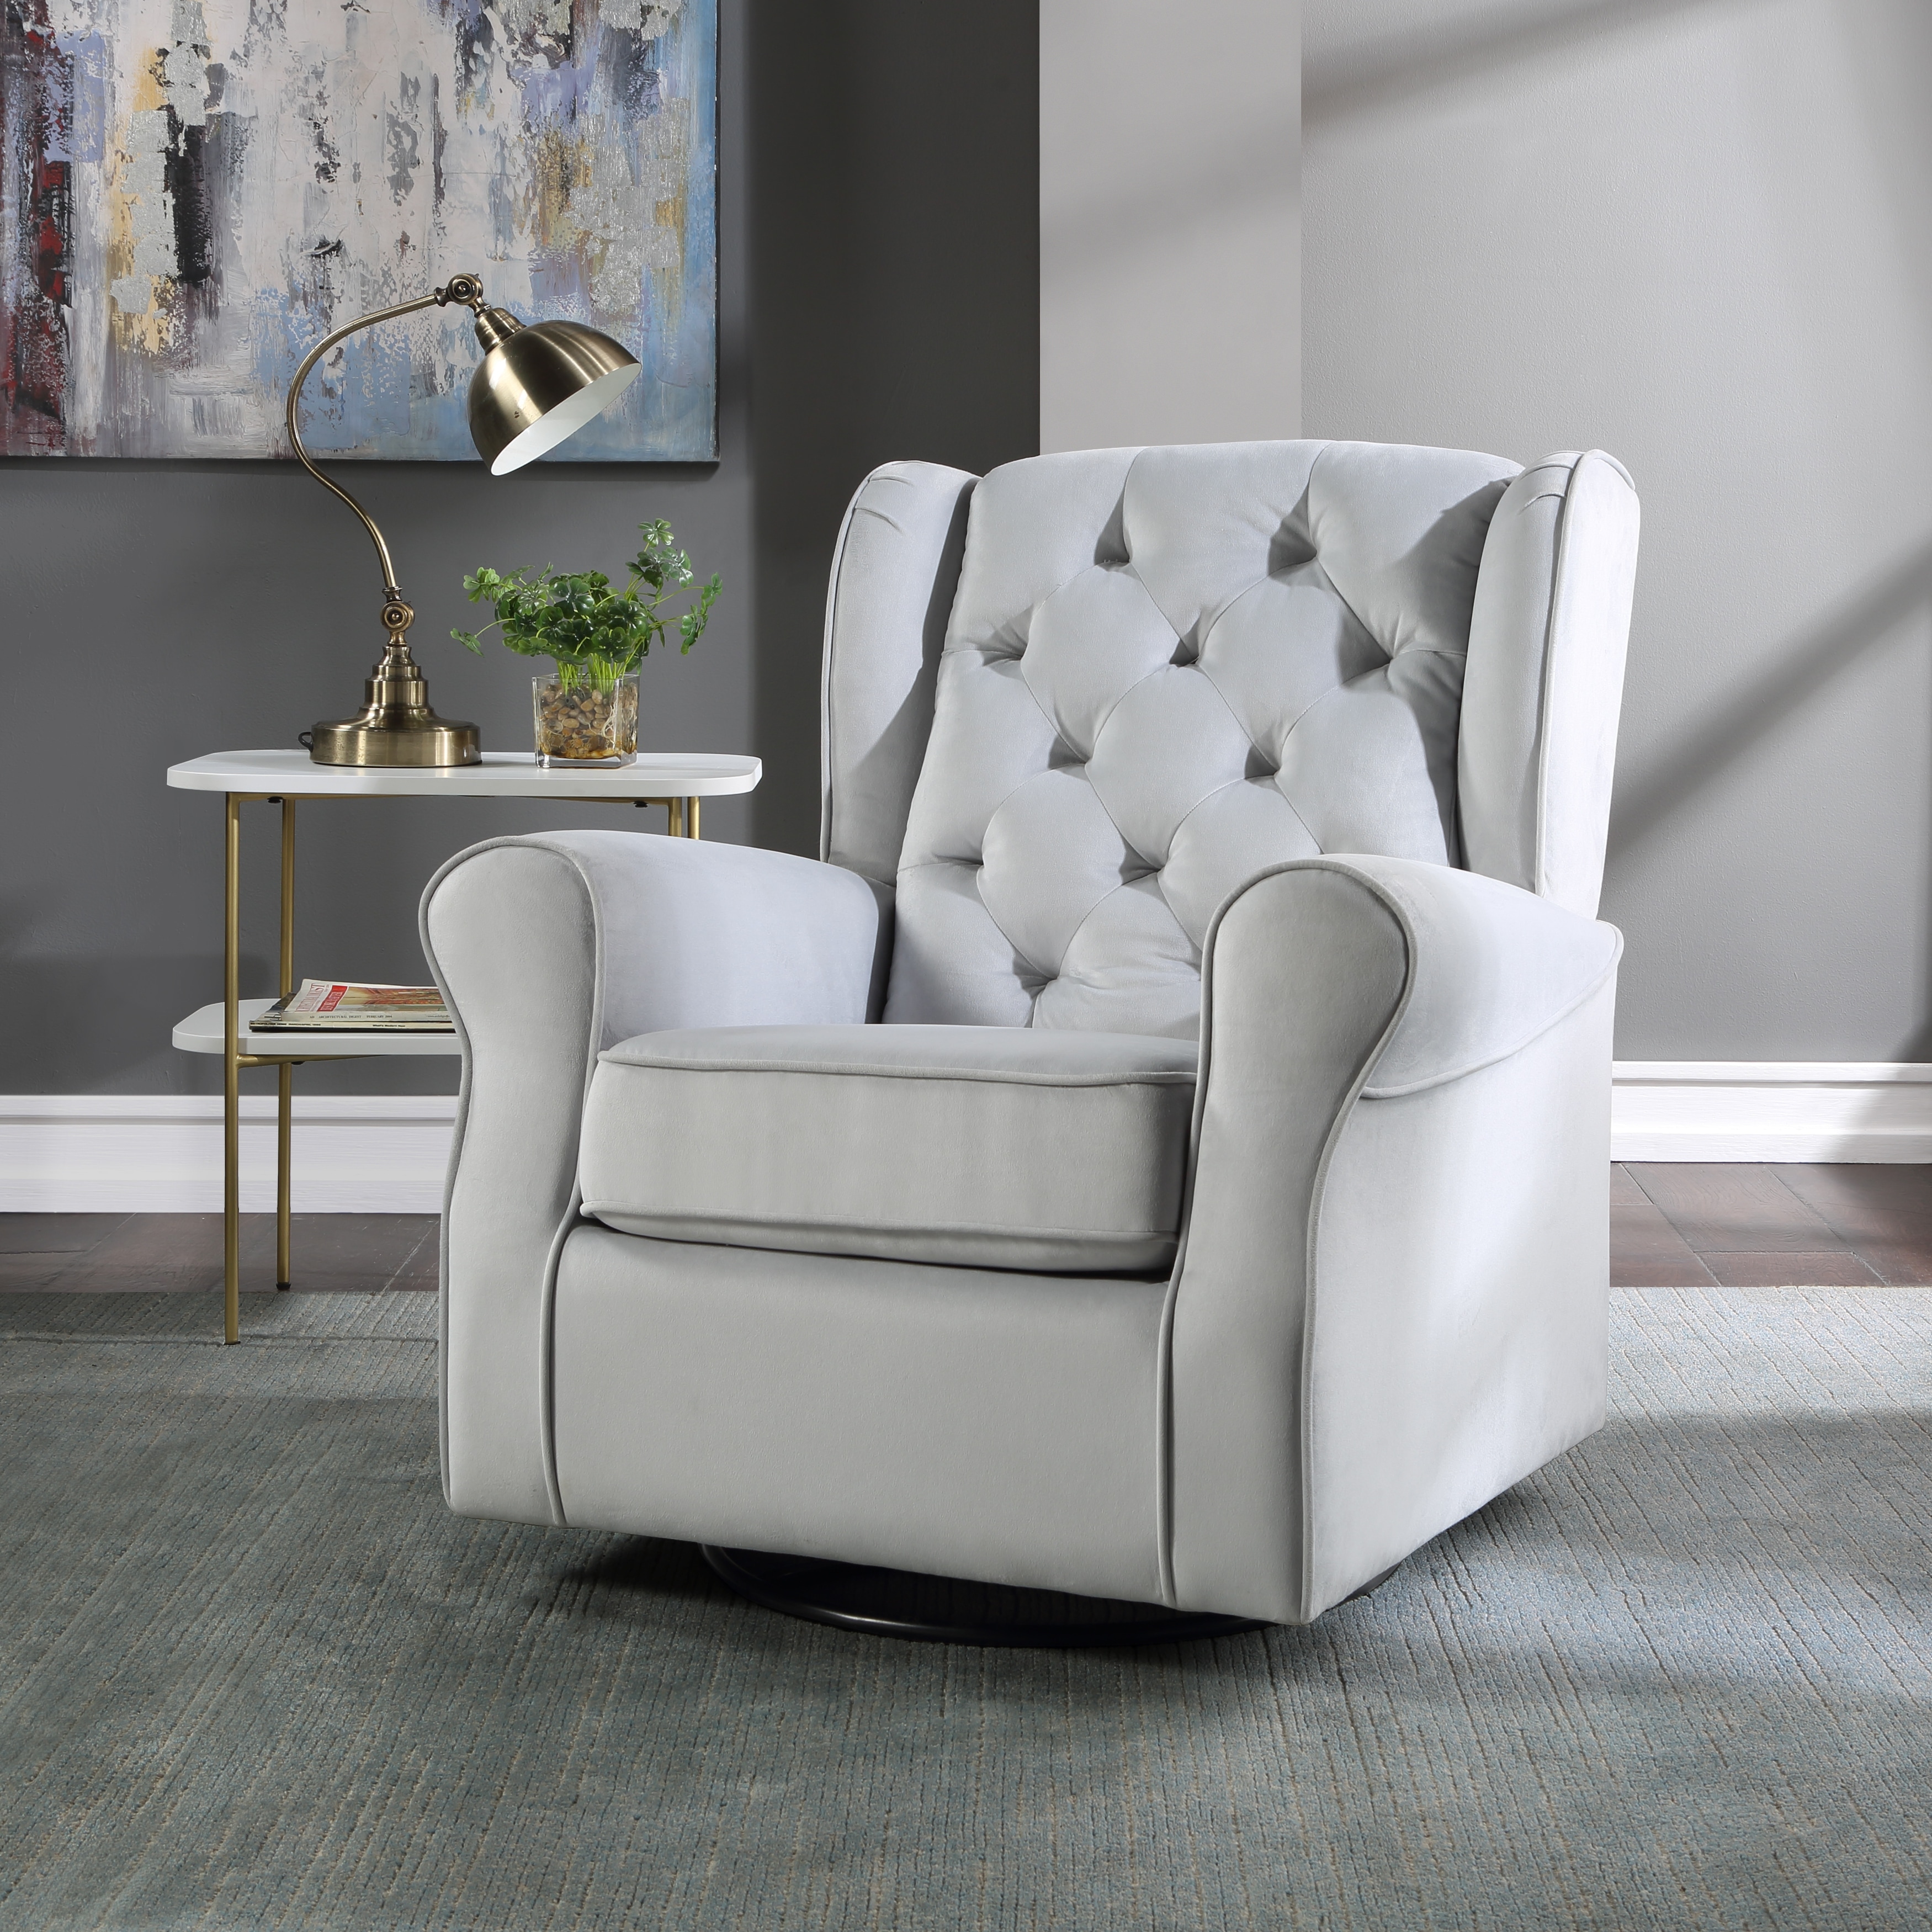 https://ak1.ostkcdn.com/images/products/is/images/direct/eaccec510f27ef8d70c57ac913d667d78ca43258/Modern-Home-Swivel-Chair-Removable-Cushion-Cover-and-Button-Tufted-on-Back-Cushion-Recliners-with-Glider-%26-Metal-Base-Leg.jpg